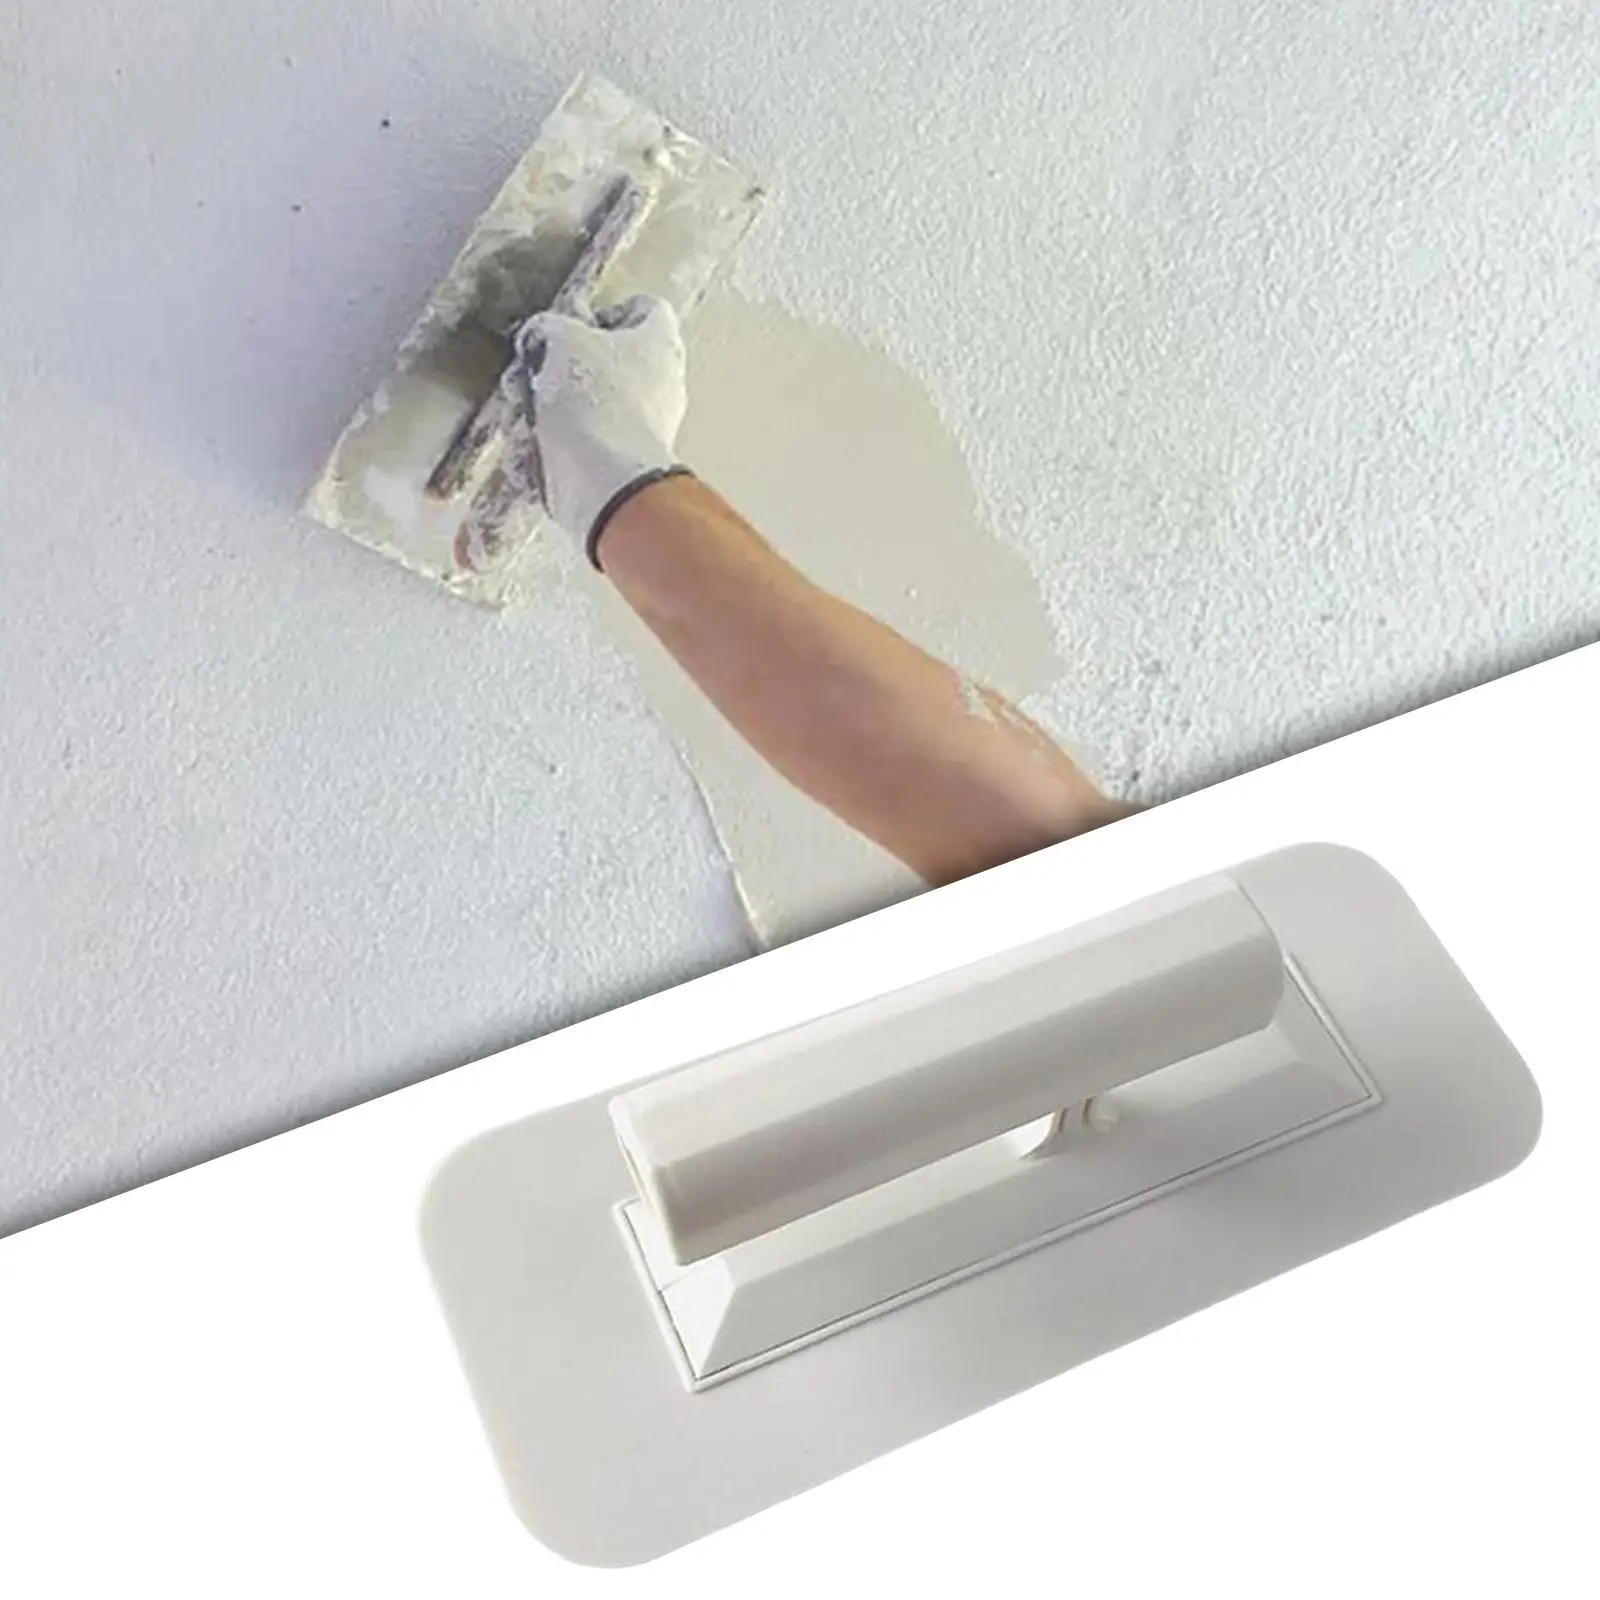 Finishing Trowel Easy to Use Fittings Drywall Skimming Blade Plastering Trowel for Concrete Grouting Float Pool Coatings